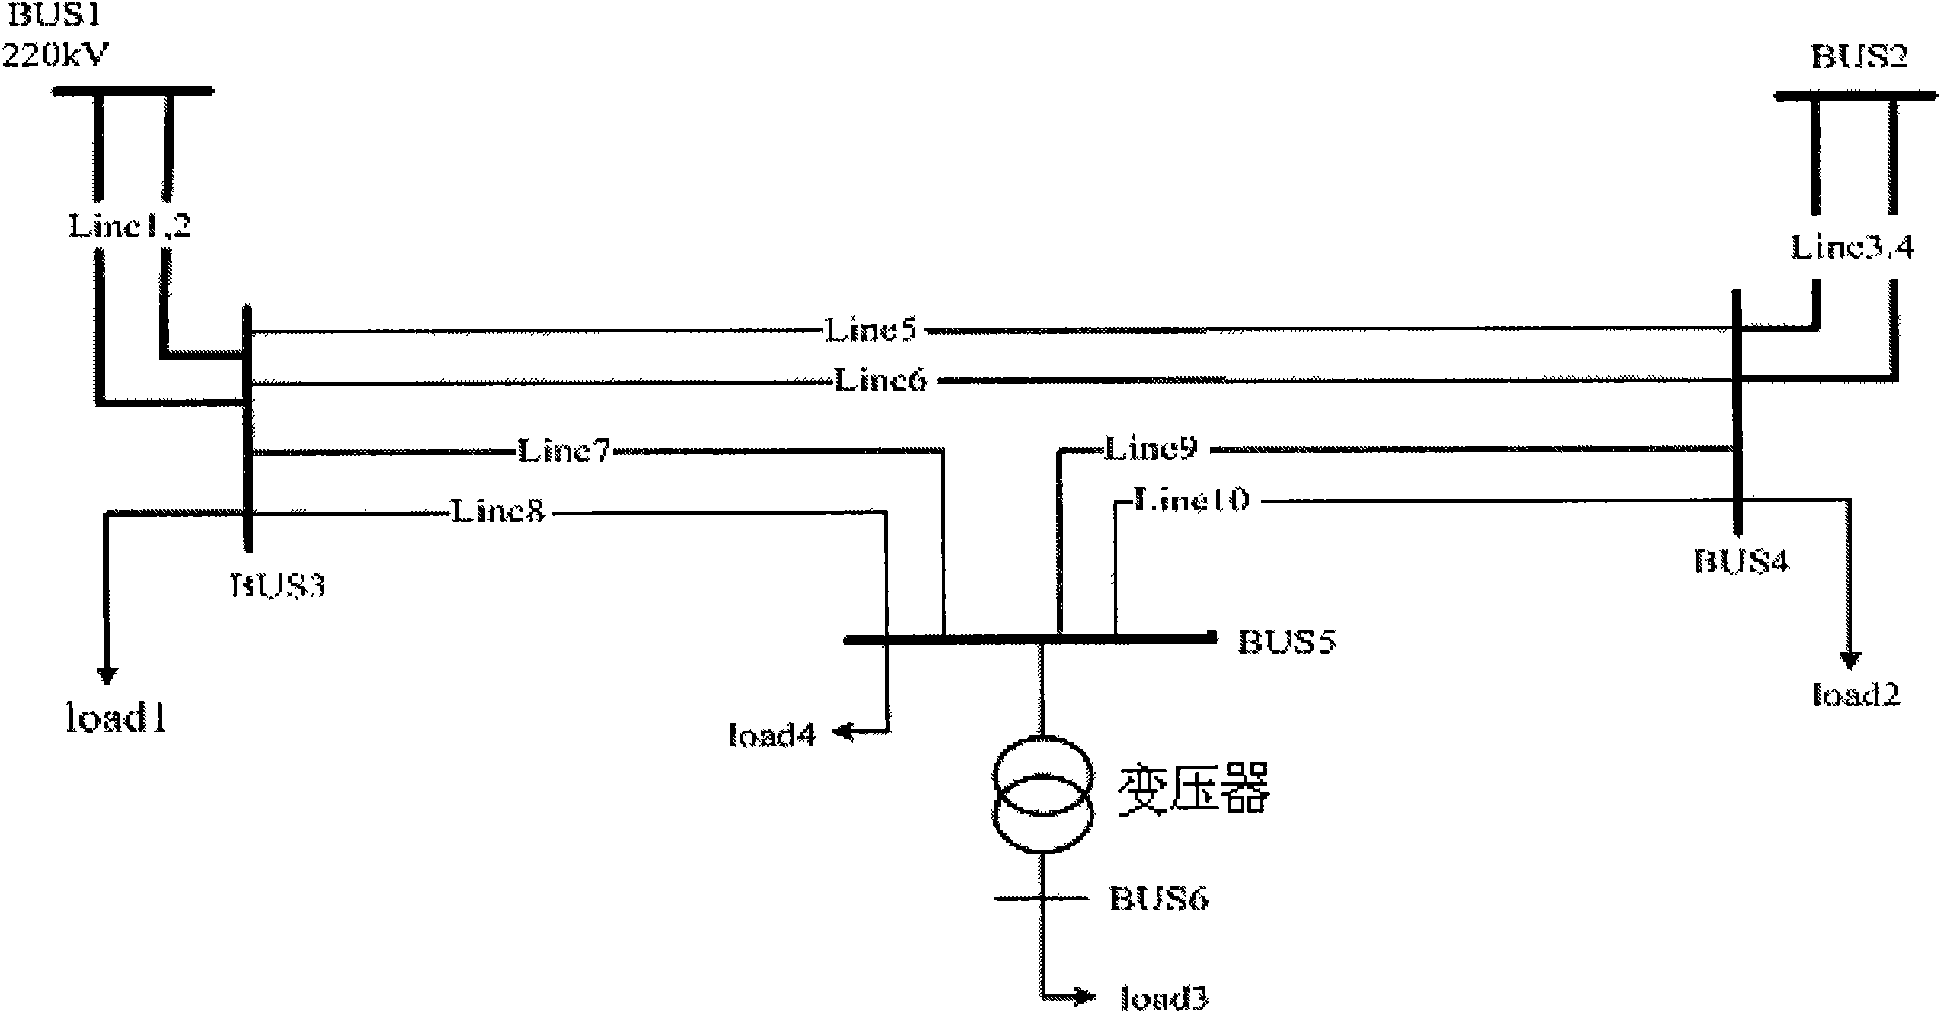 System for calculating power supply abundance of urban power network